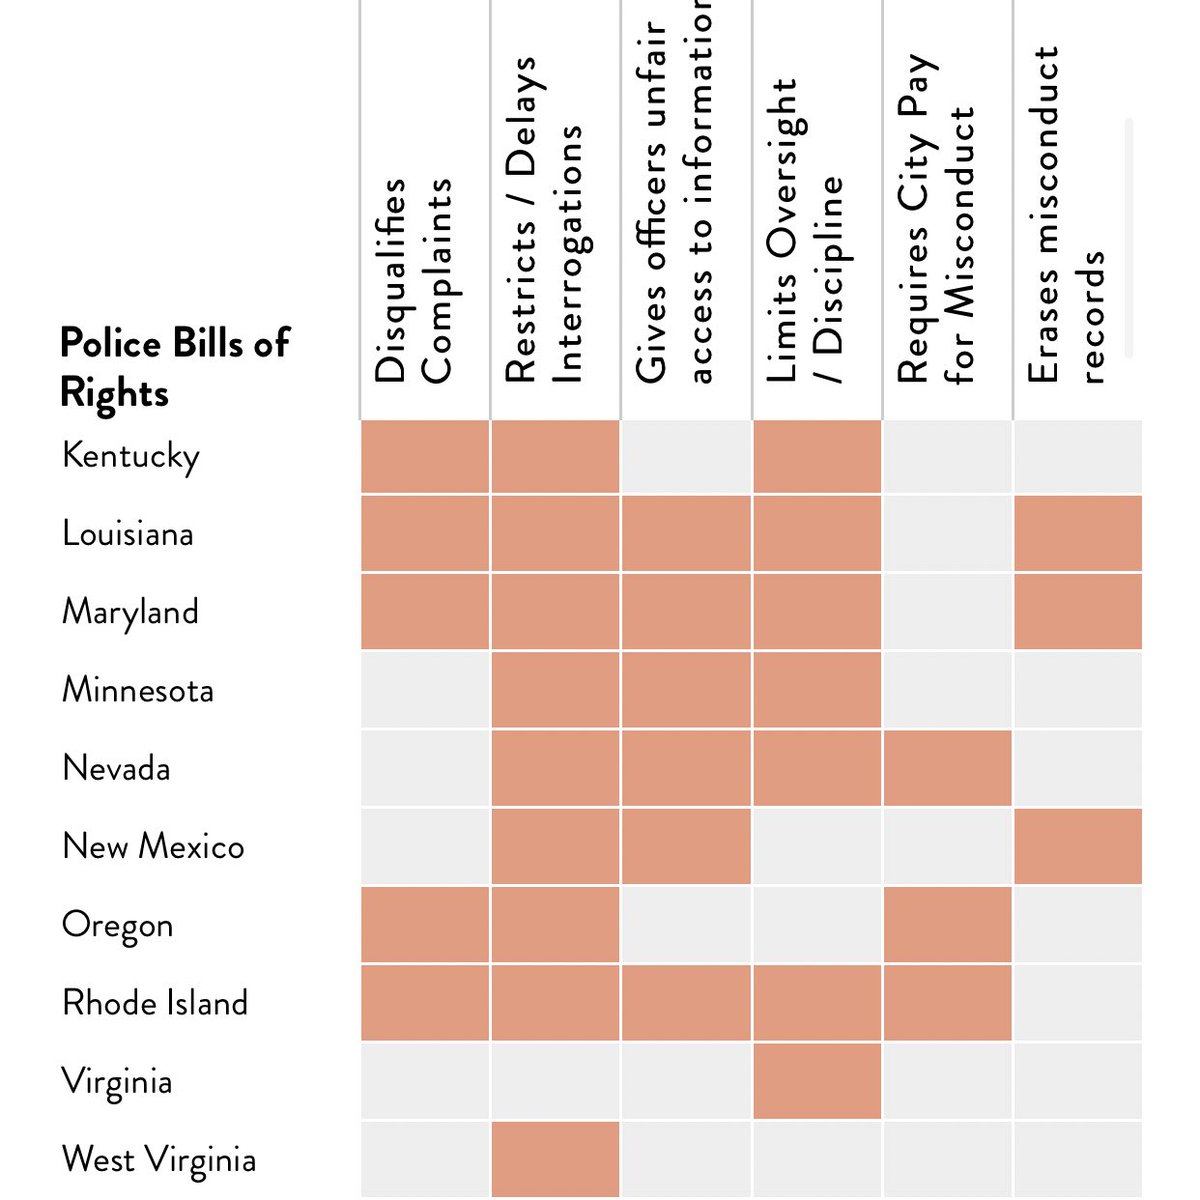 11. 15 states have “police bill of rights” laws that impose ADDITIONAL legal restrictions that make it even harder to hold police accountable. But 35 states don’t do this. No reason these police bill of rights laws can’t be repealed entirely.  https://www.checkthepolice.org/ 